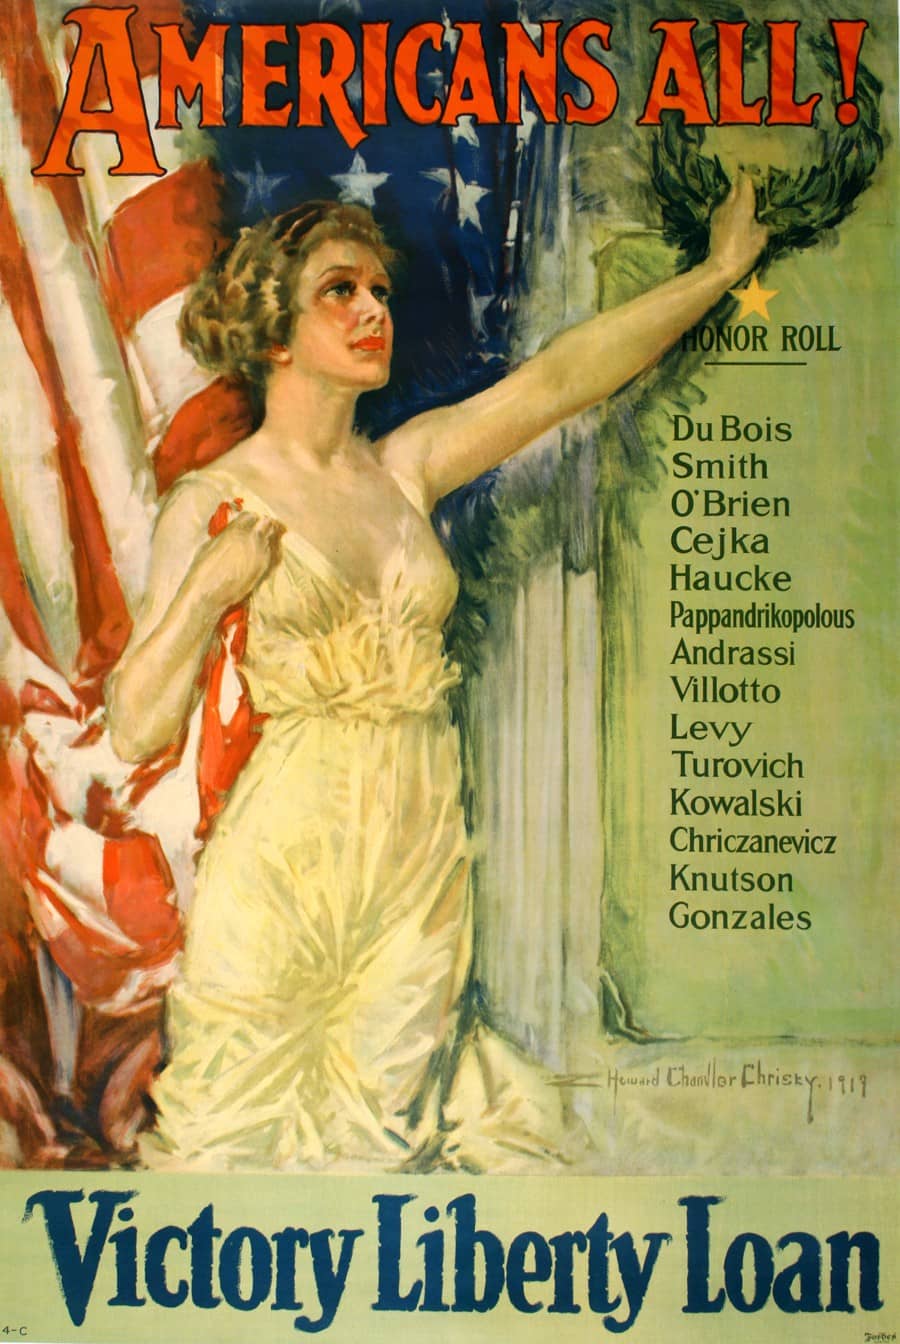 Americans All! Victory Liberty Loan Original Vintage WWI Poster by Christy 1919